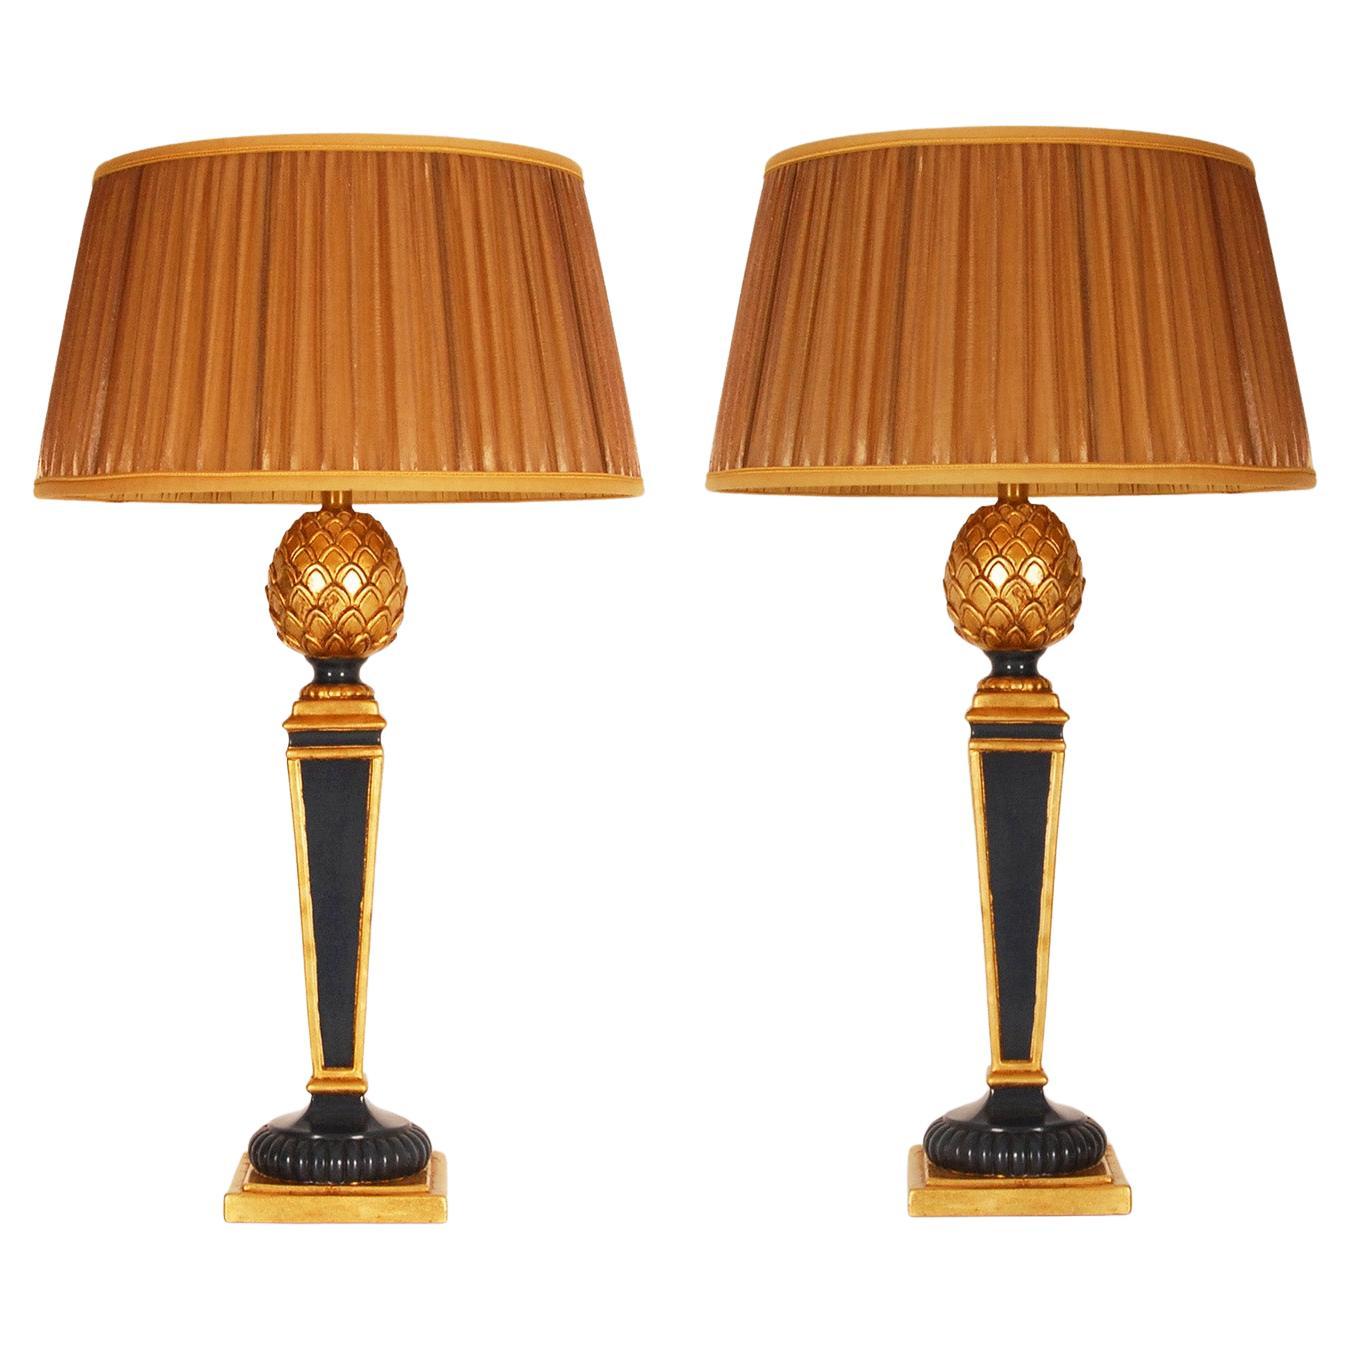 A paair vintage 1970s French lamps blue and faux gold giltwood pineapple table lamps.
Material: Giltwood, fruitwood, metal
Style: Vintage, Mid Century, Hollywood Regency, Traditional, Classic, Empire, Napoleonic
Design: In the style of Henredon,